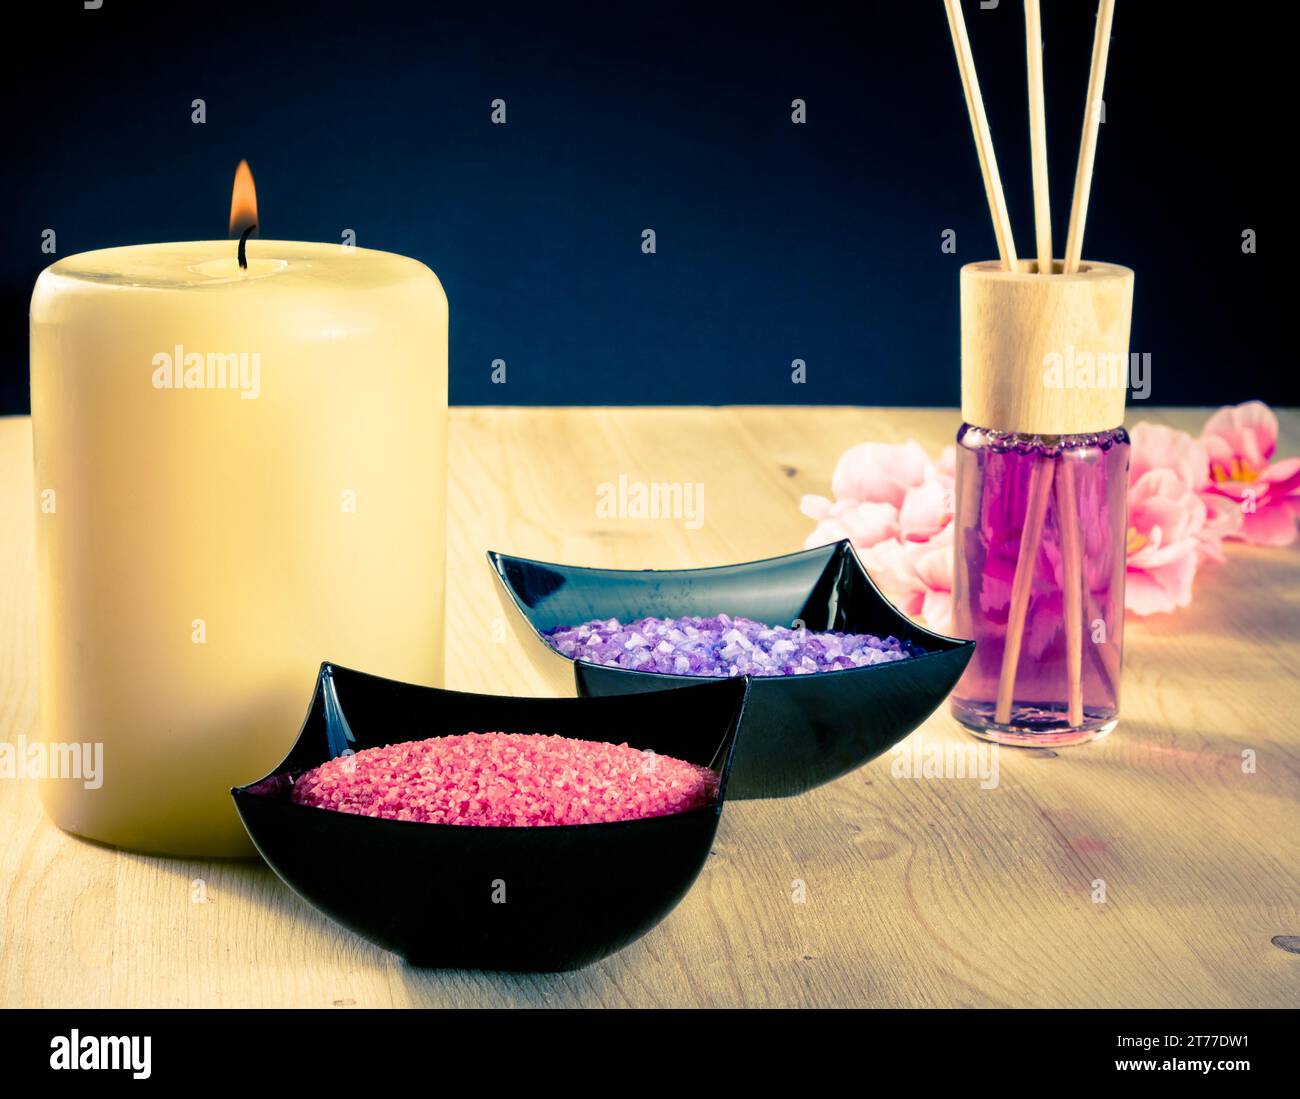 Spa massage border background with perfume diffuser and sea salt, warm atmosphere Stock Photo